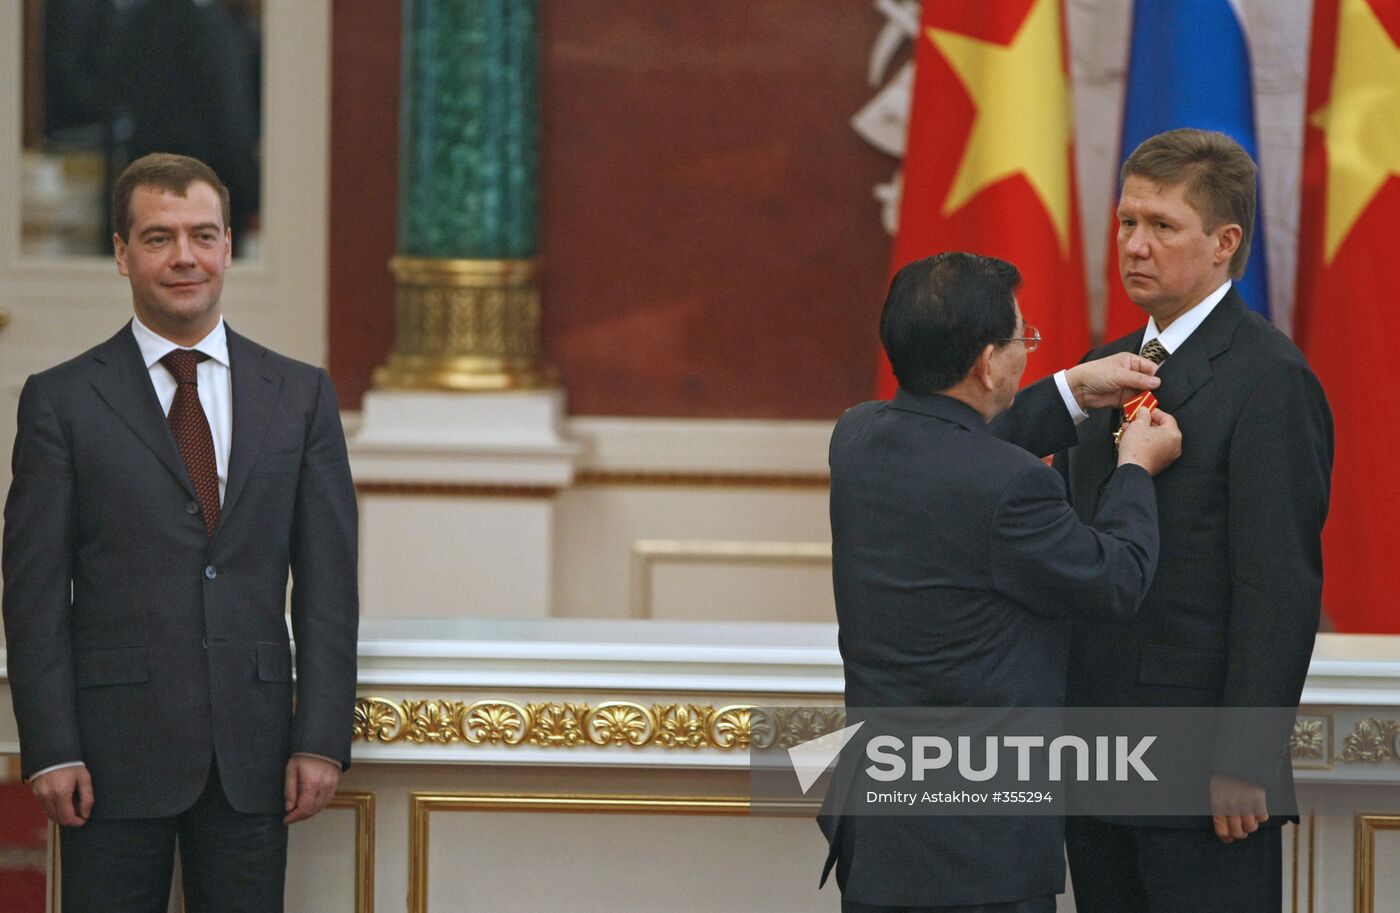 Russian president meets with his Vietnamese counterpart